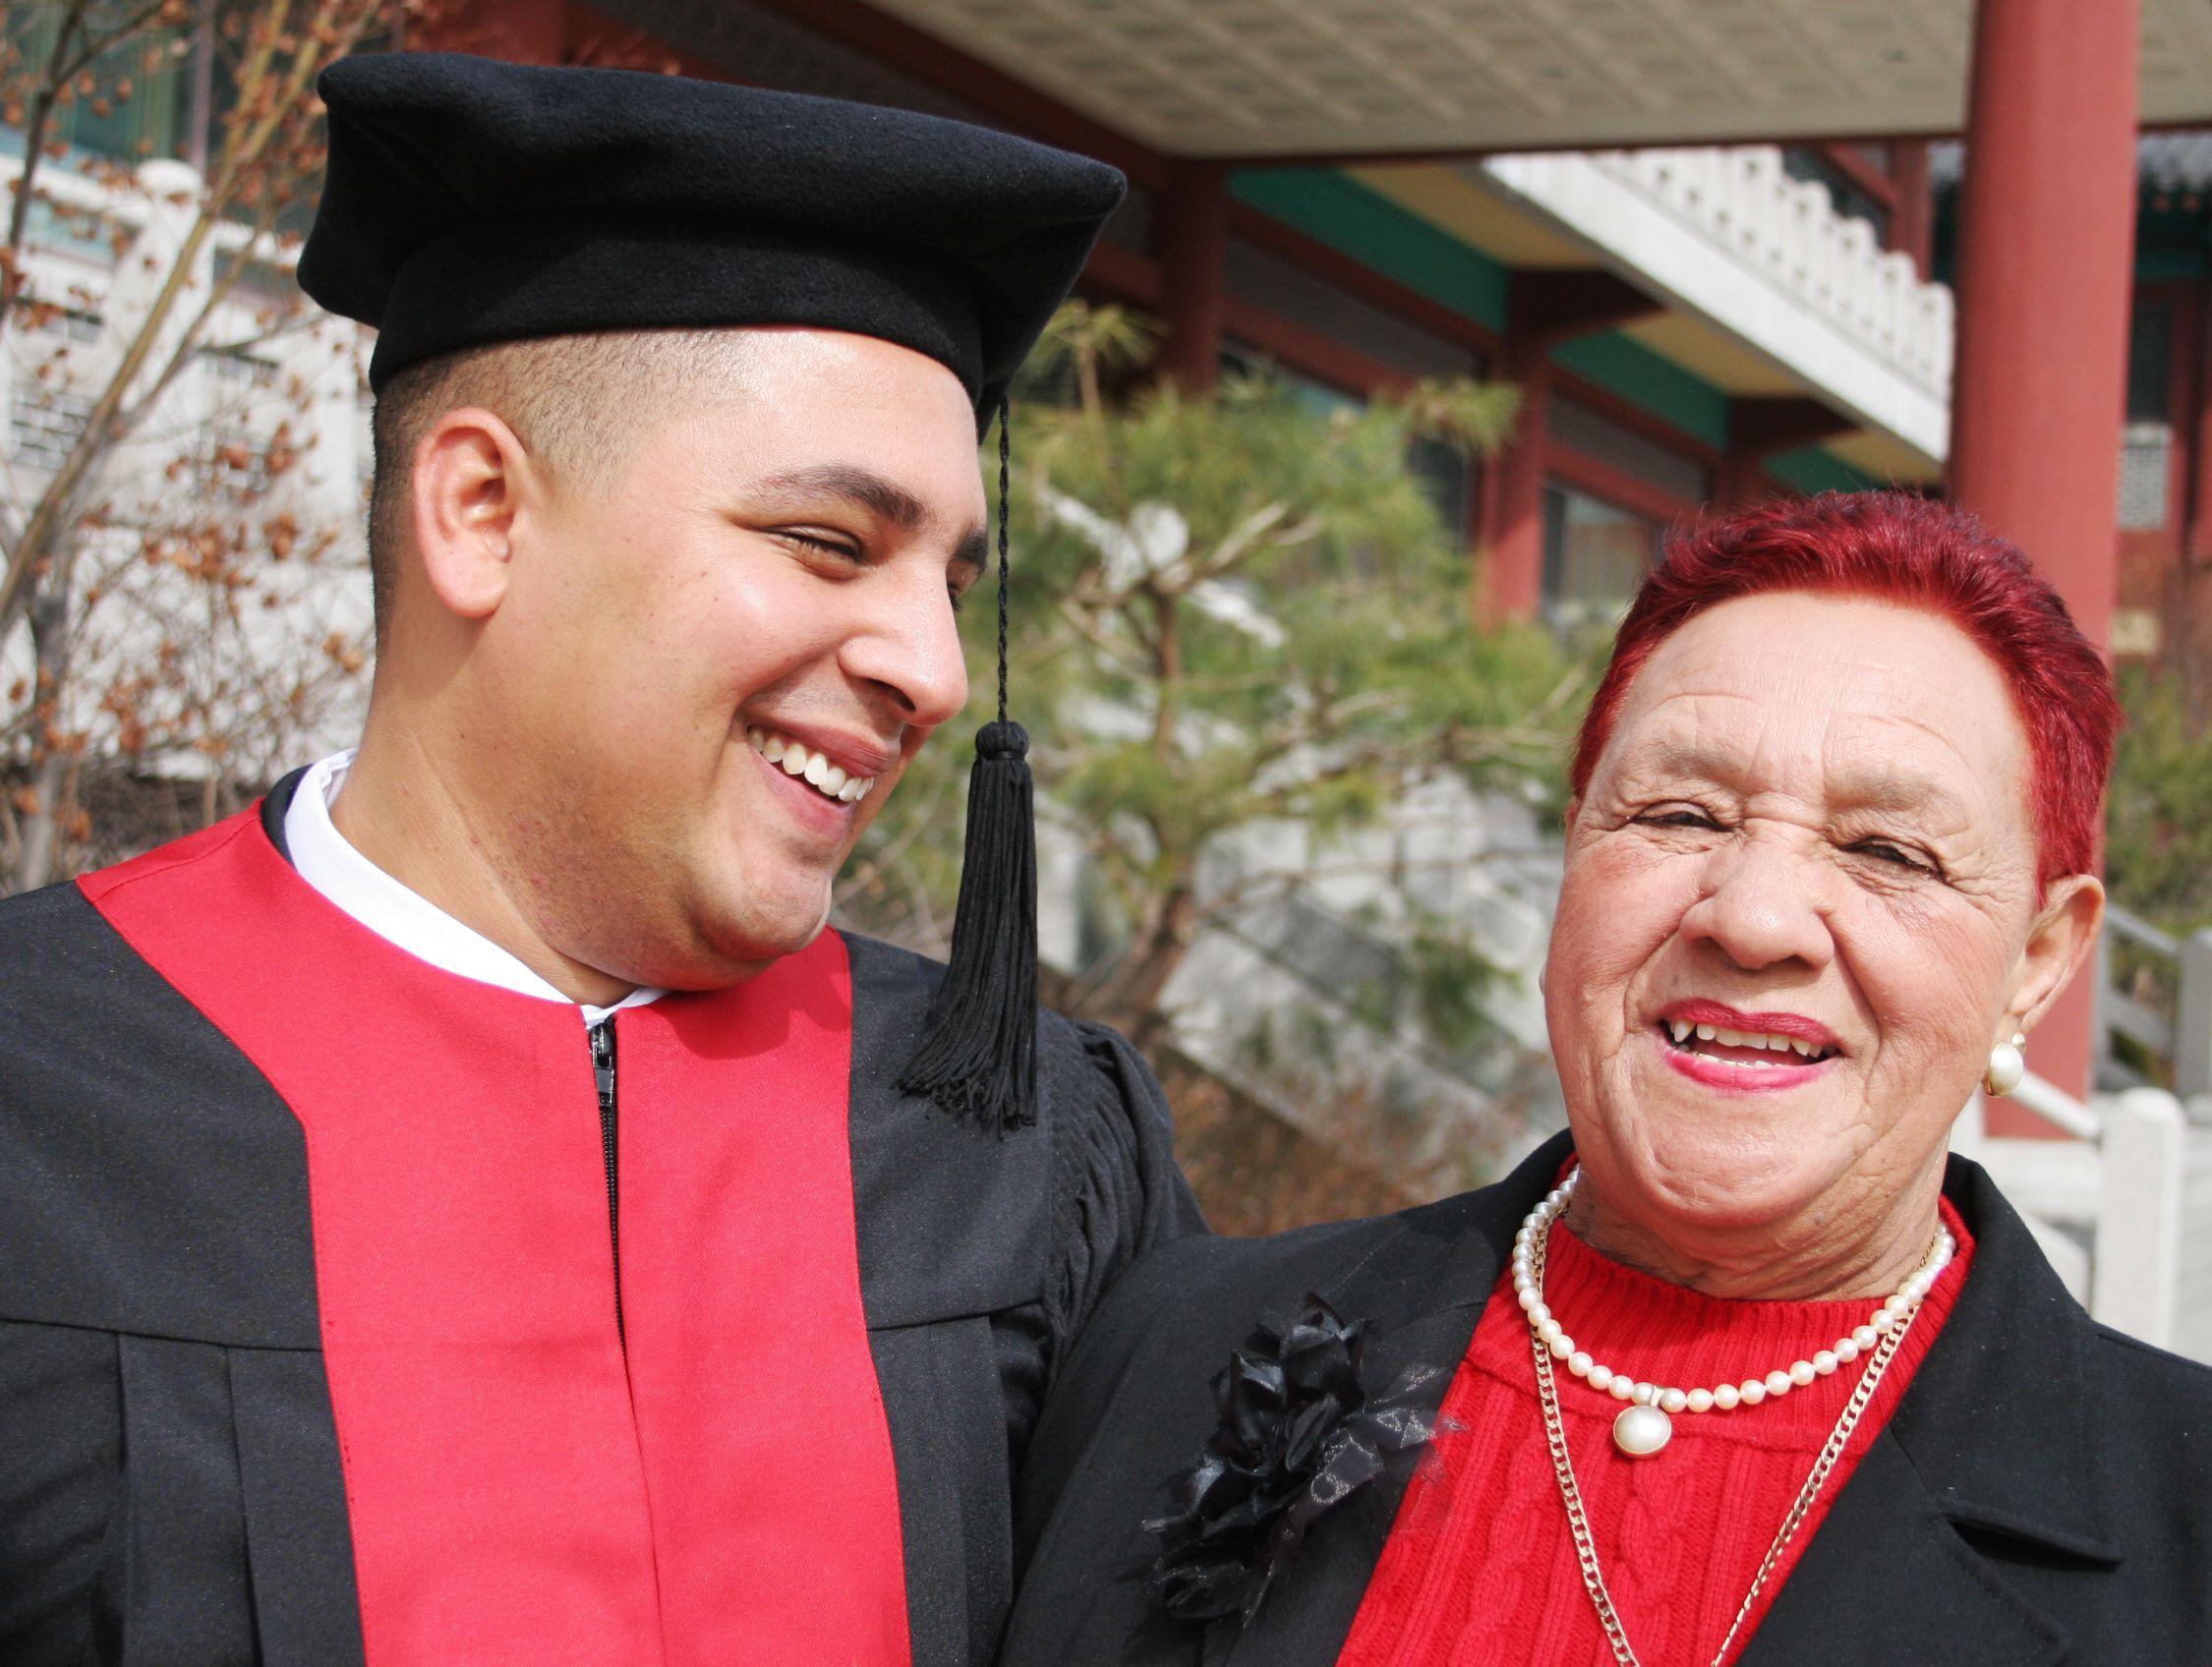 University graduate shares a moment with his grandmother - happy and successful